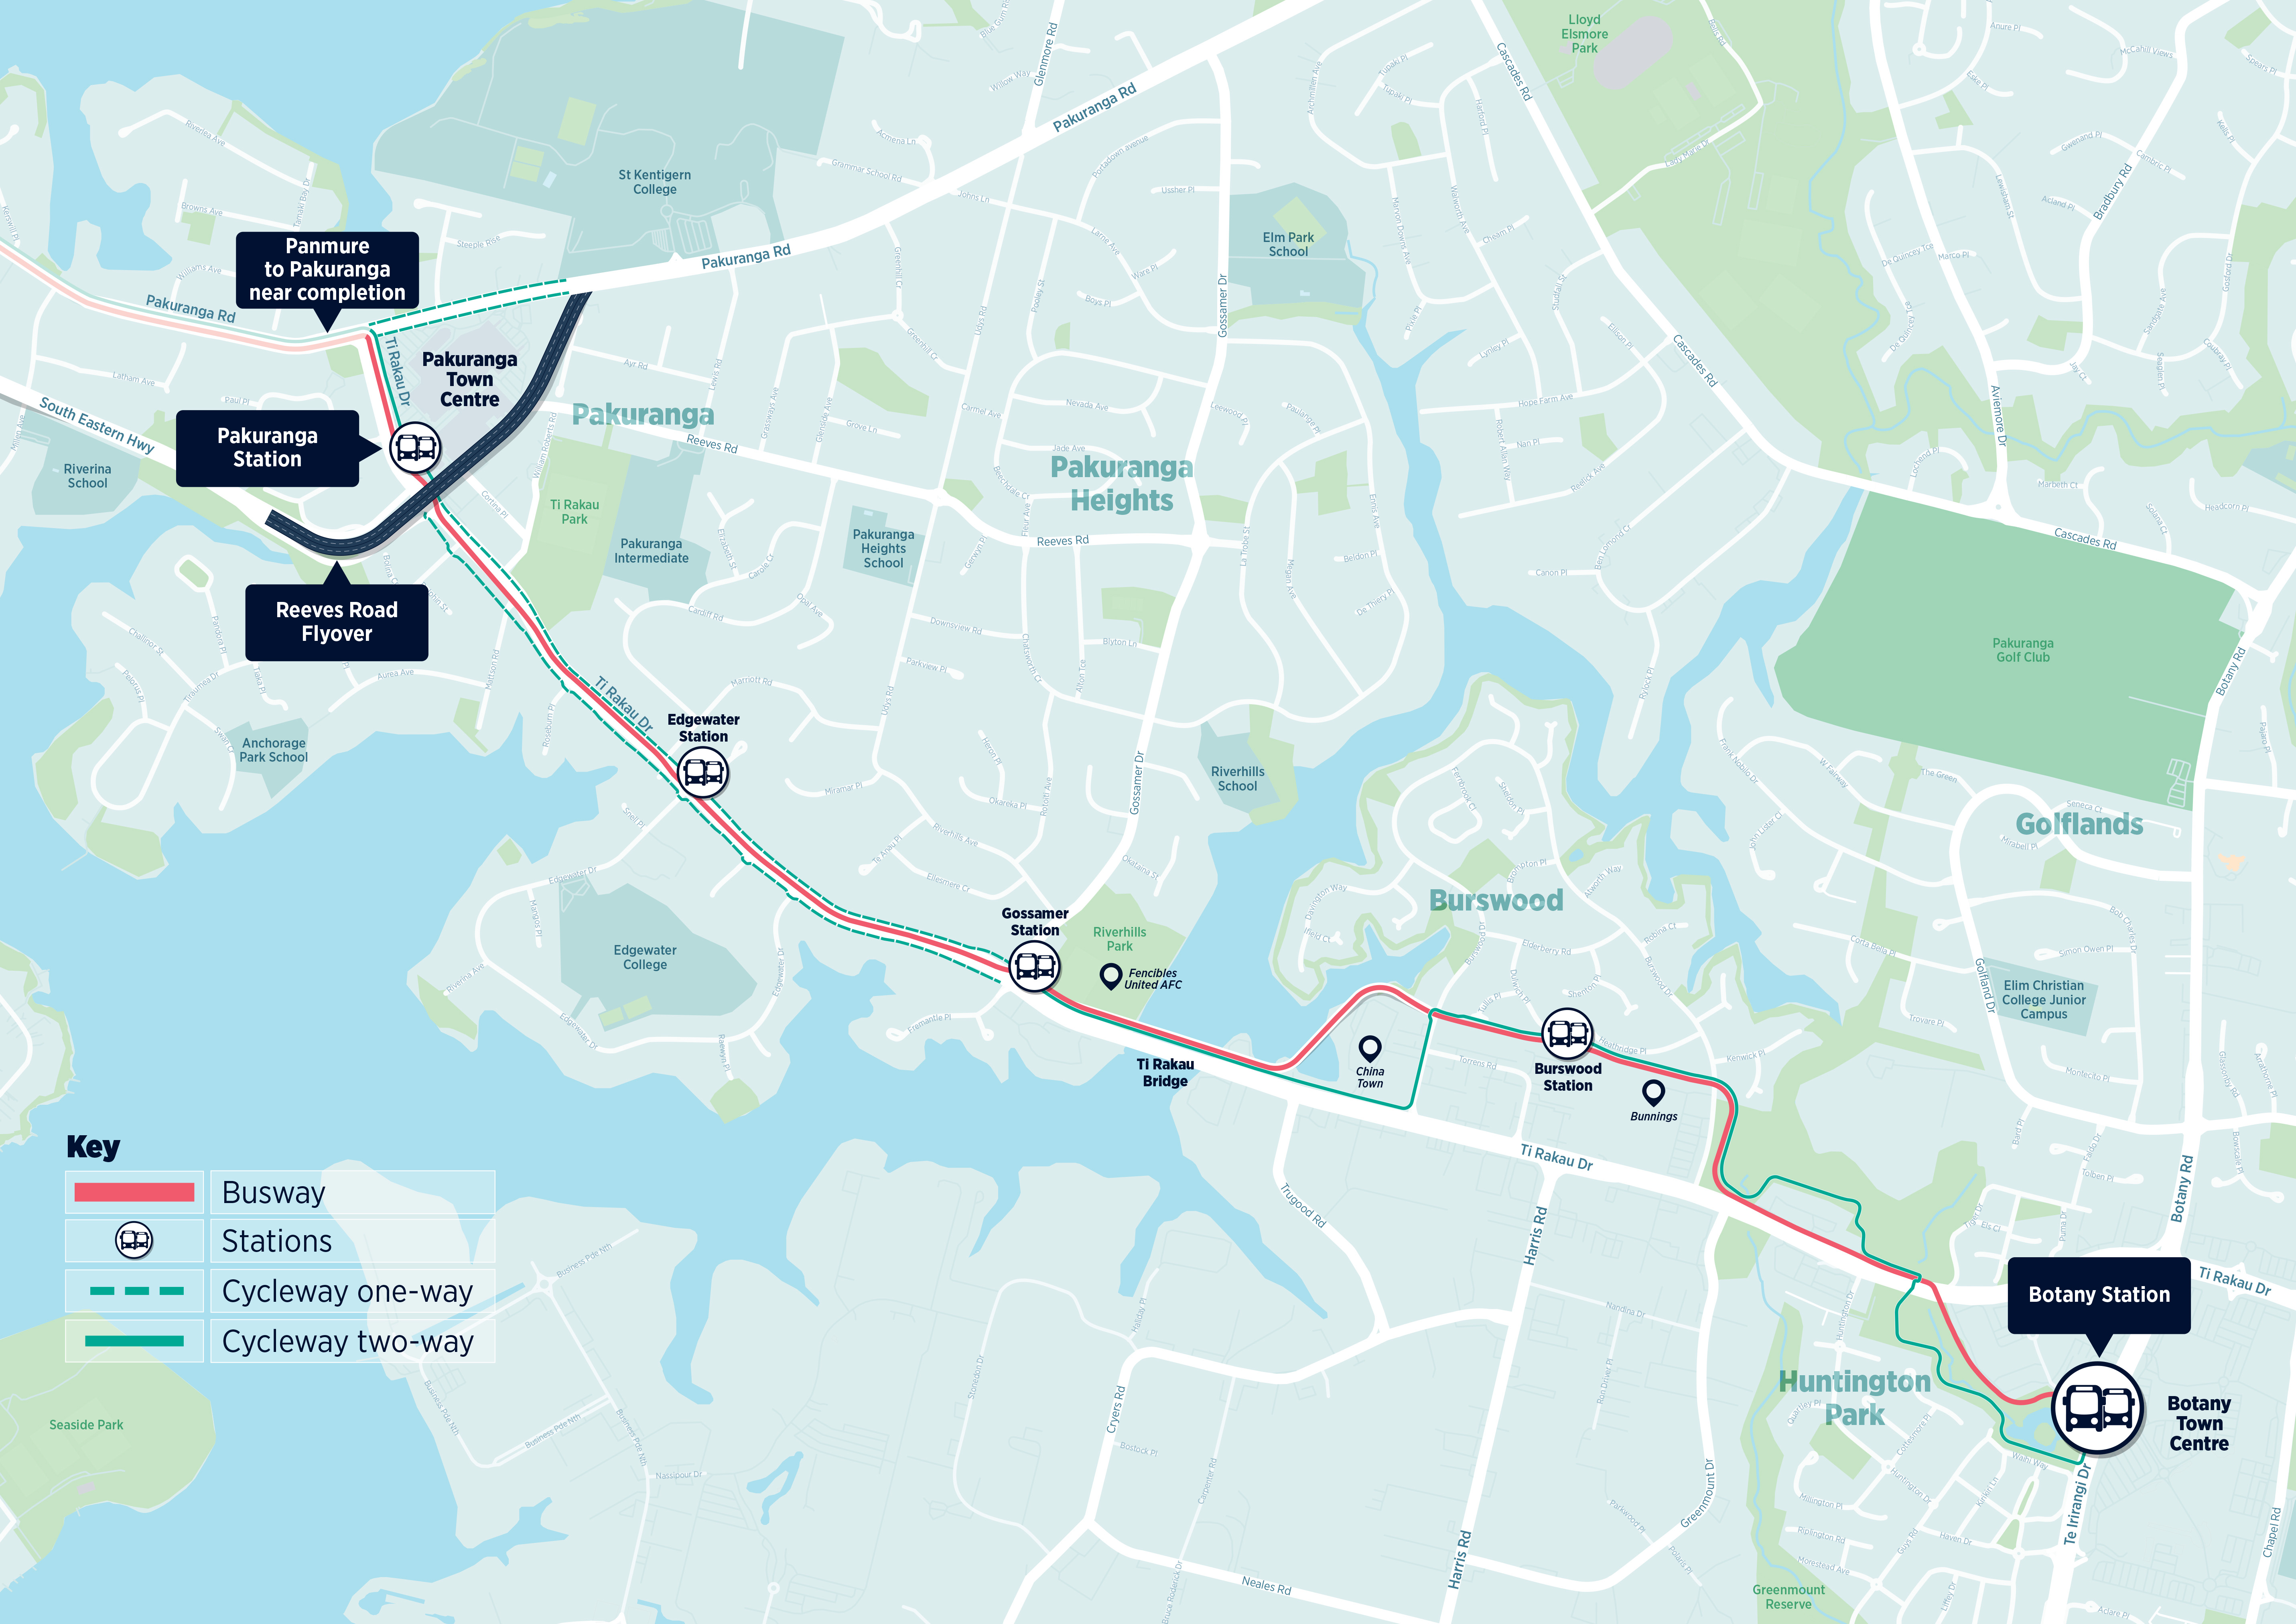 Proposed route of the busway from Pakuranga to Botany